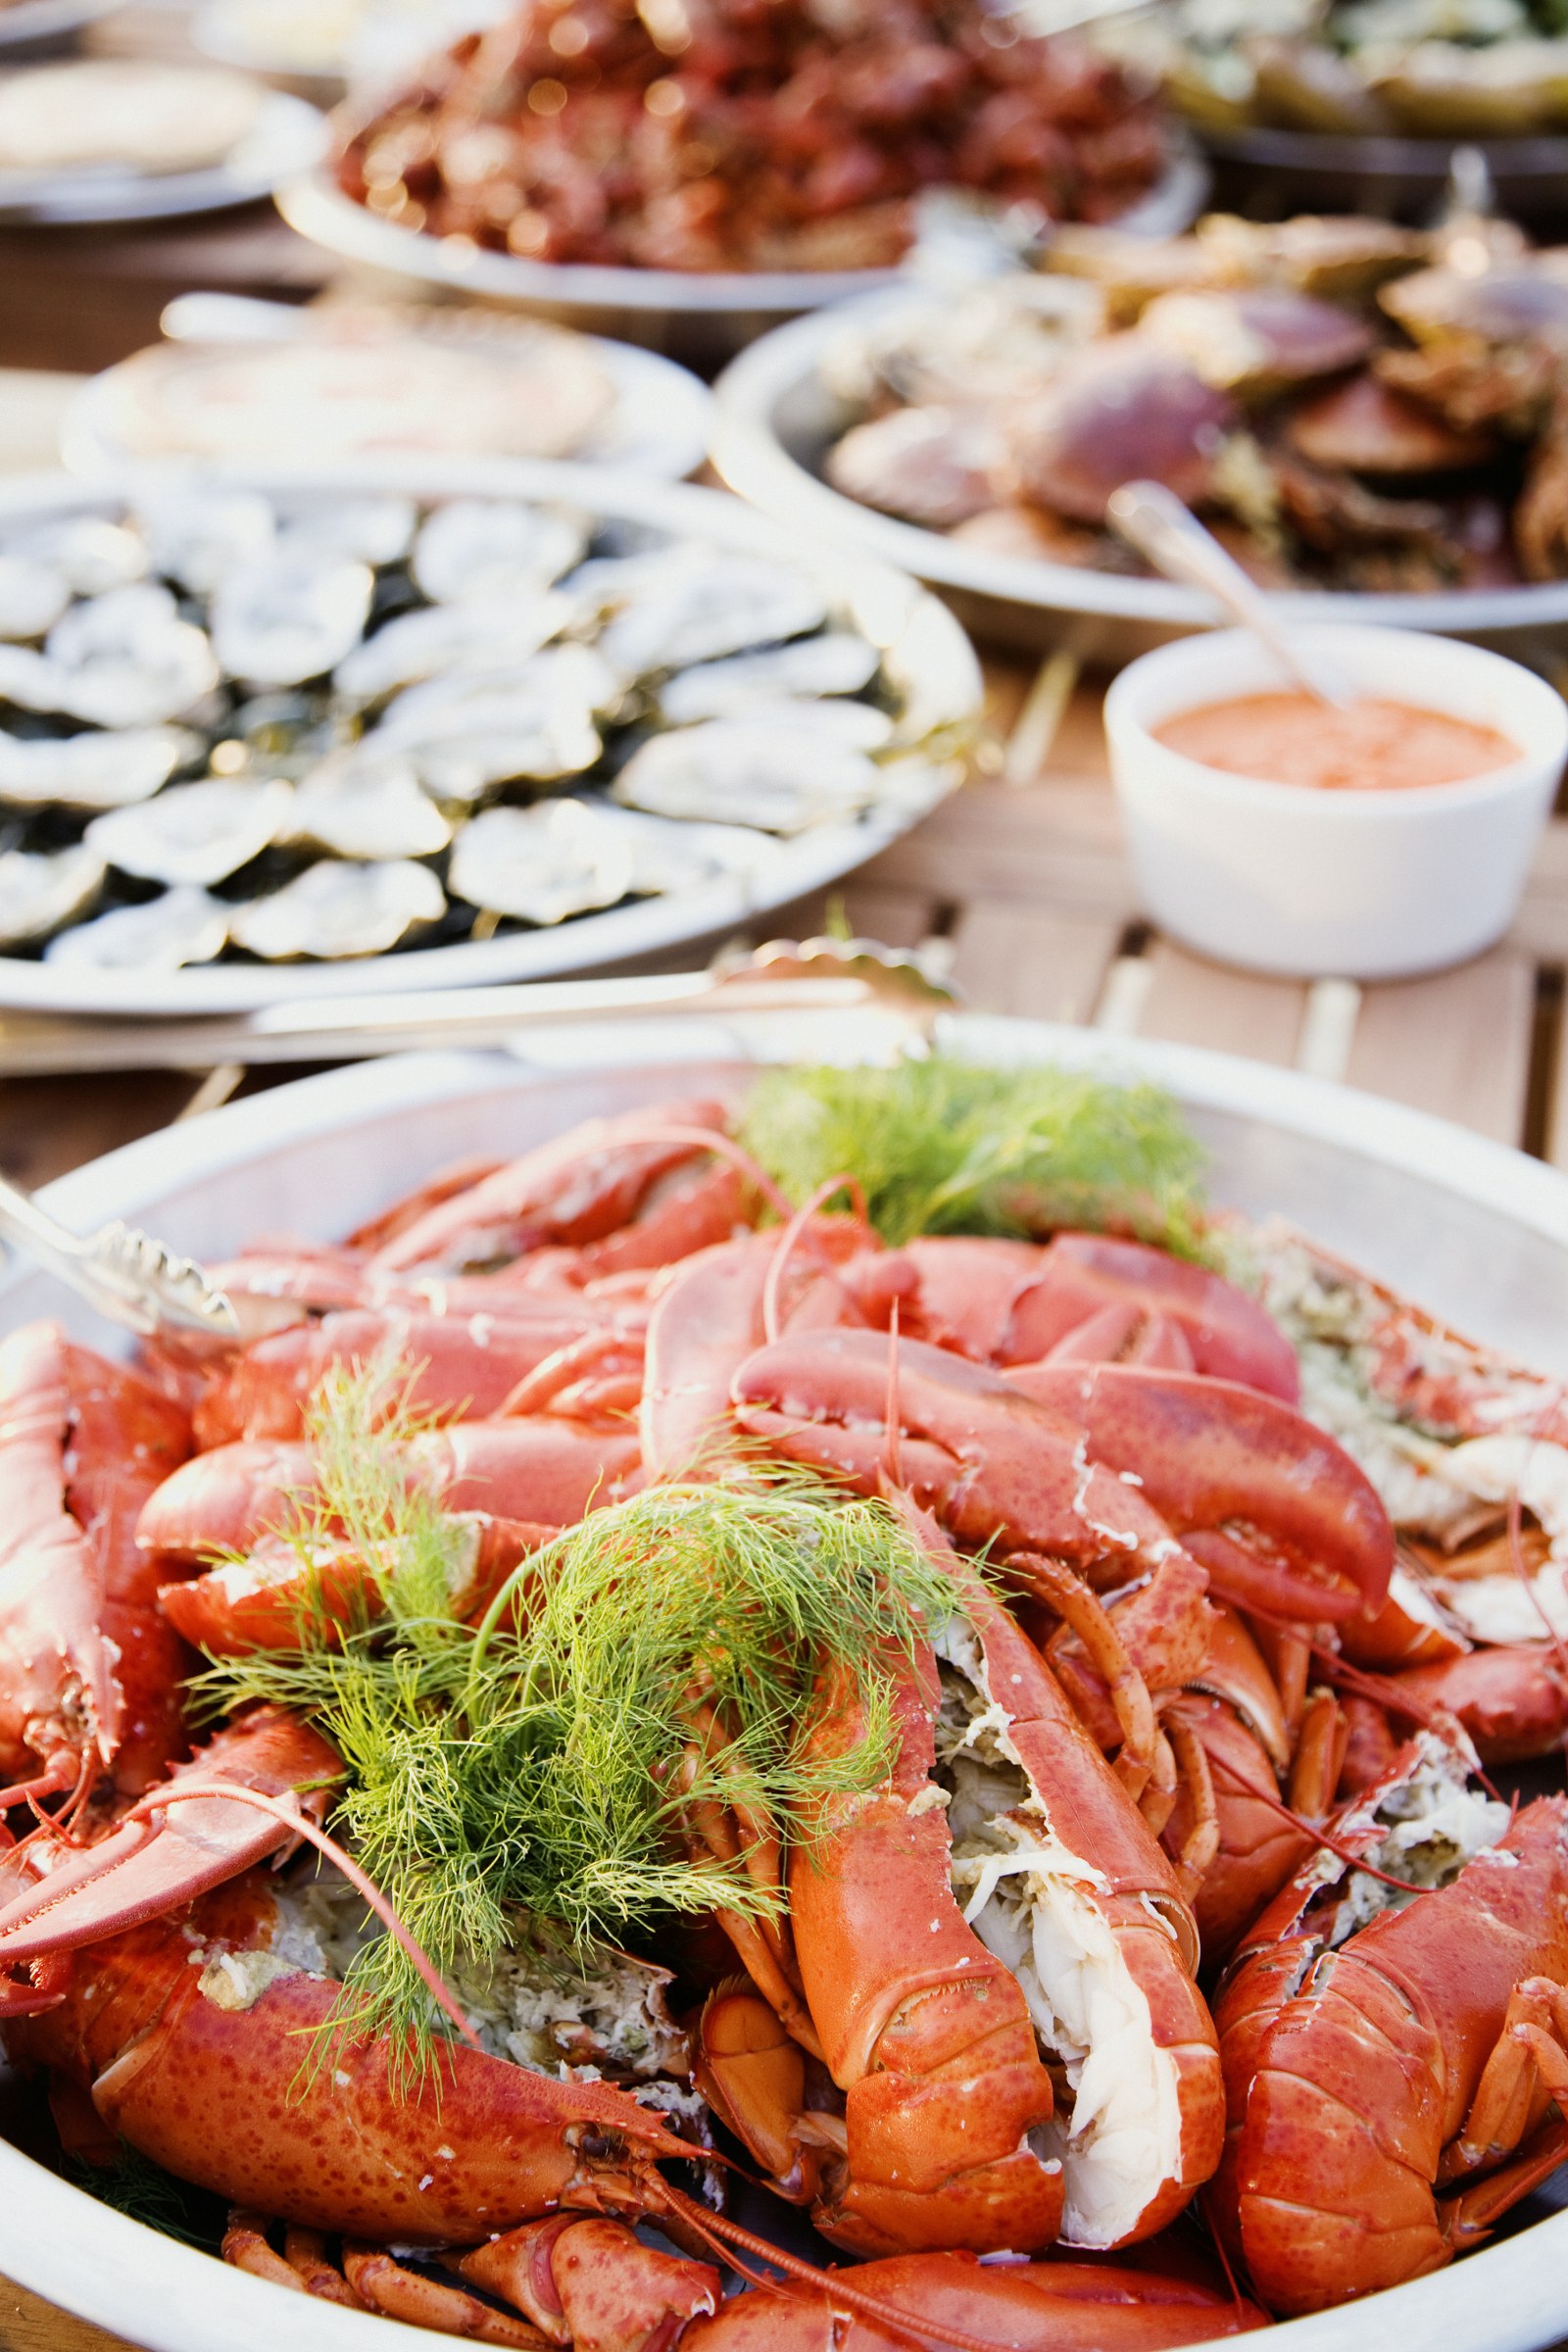 A plate of lobster in the foreground with several other seafood dishes out of focus in the background